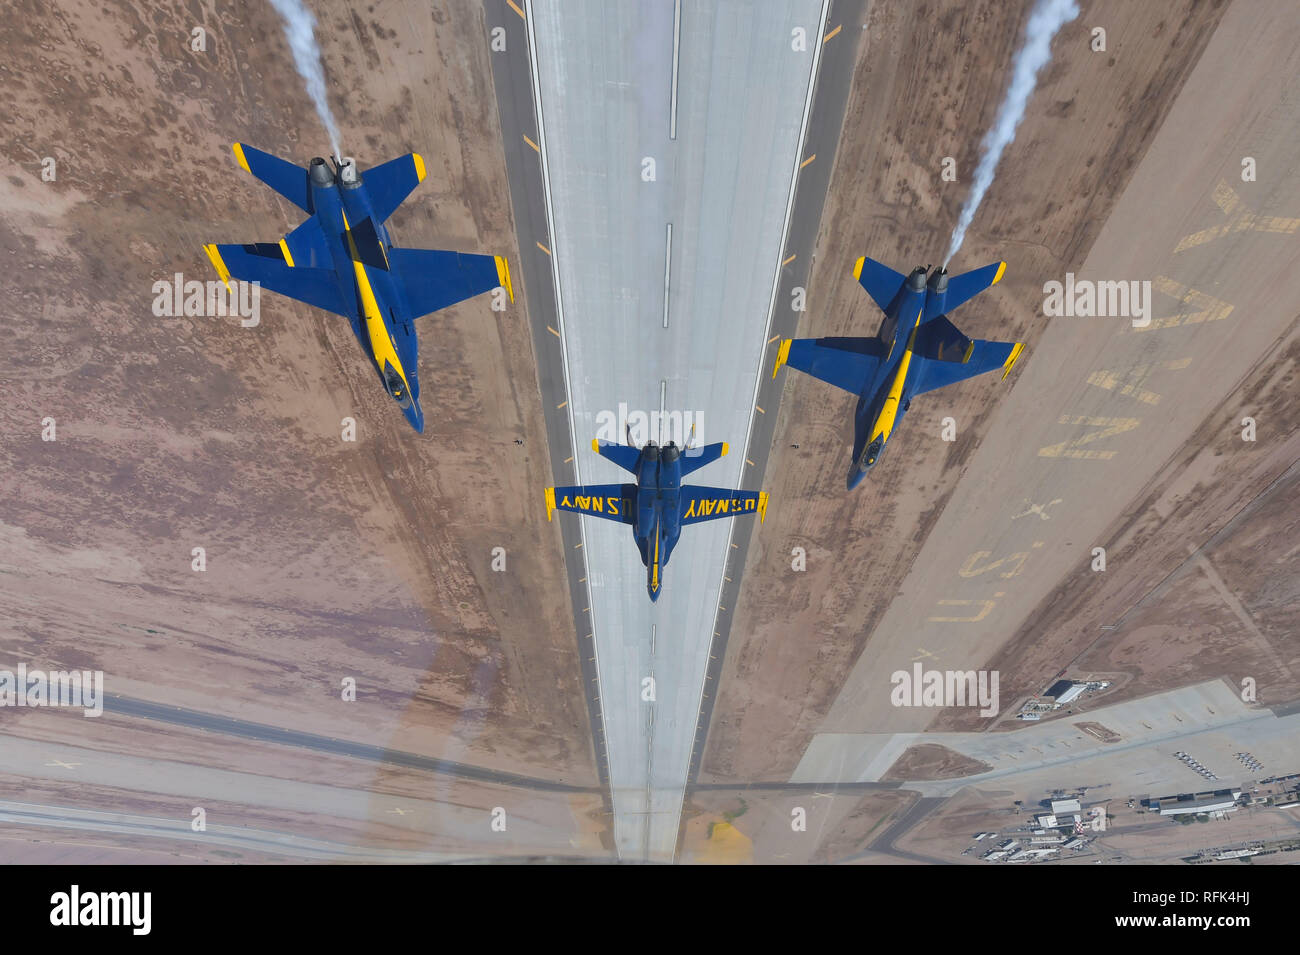 190124-N-OY339-1401 EL CENTRO, Calif. (Jan. 24, 2019) — Pilots assigned to the U.S. Navy Flight Demonstration Squadron, the Blue Angels, perform the double farvel maneuver during a winter training flight over Naval Air Facility (NAF) El Centro.  The team is scheduled to conduct 61 flight demonstrations at 32 locations across the country to showcase the pride and professionalism of the U.S. Navy and Marine Corps to the American public in 2019. (U.S. Navy photo by Mass Communication Specialist 2nd Class Christopher Gordon) Stock Photo